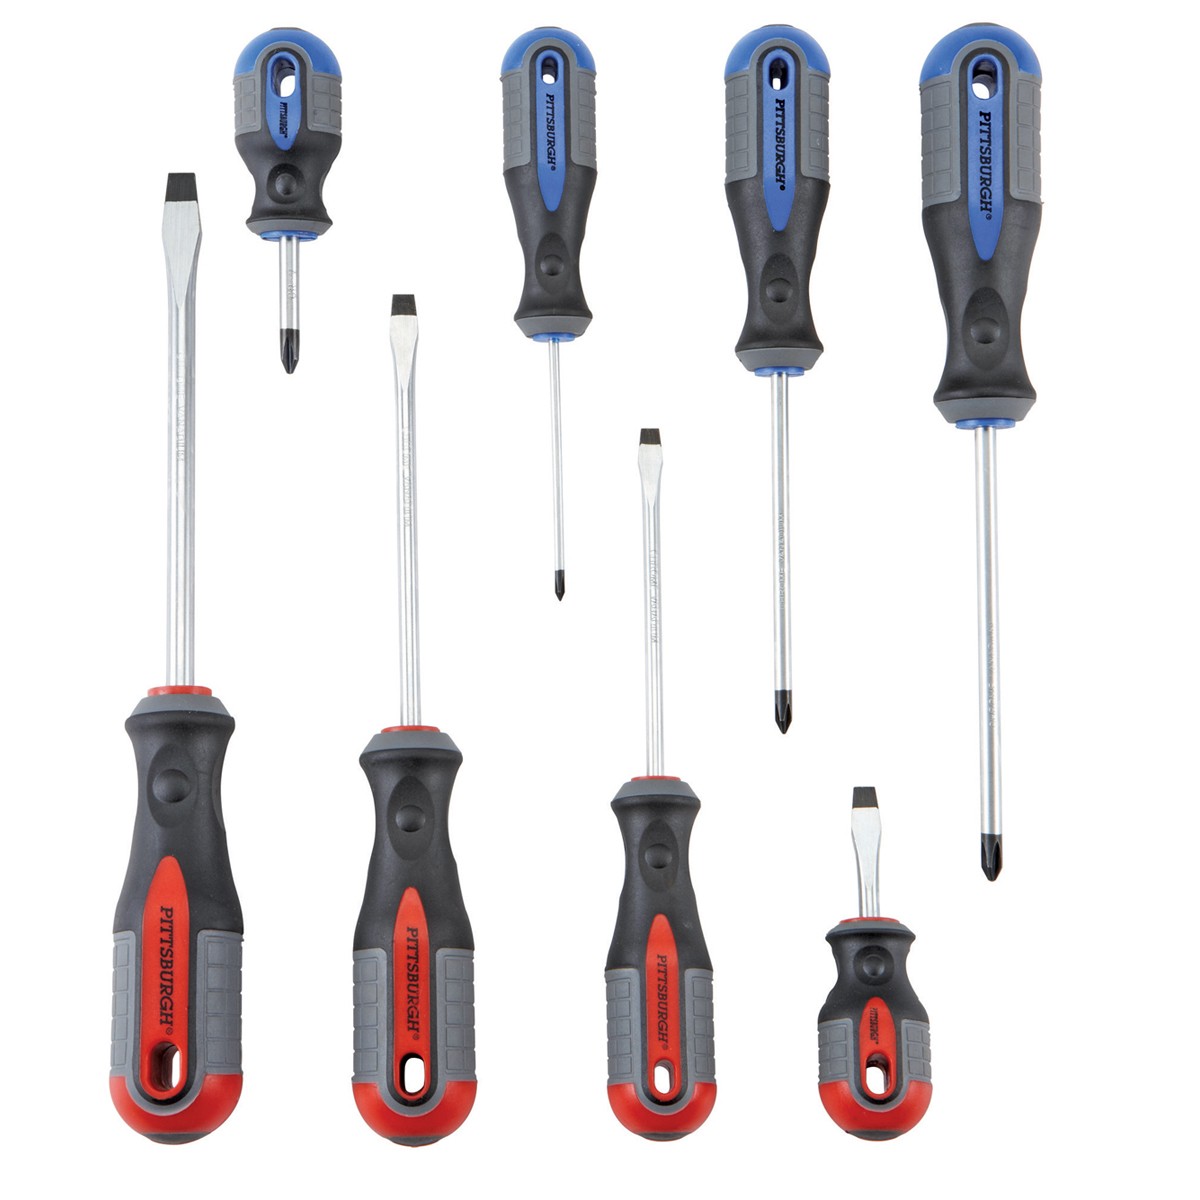 PITTSBURGH Screwdriver Set, 8 Pc. ($6.99 in store sale) Harbor Freight